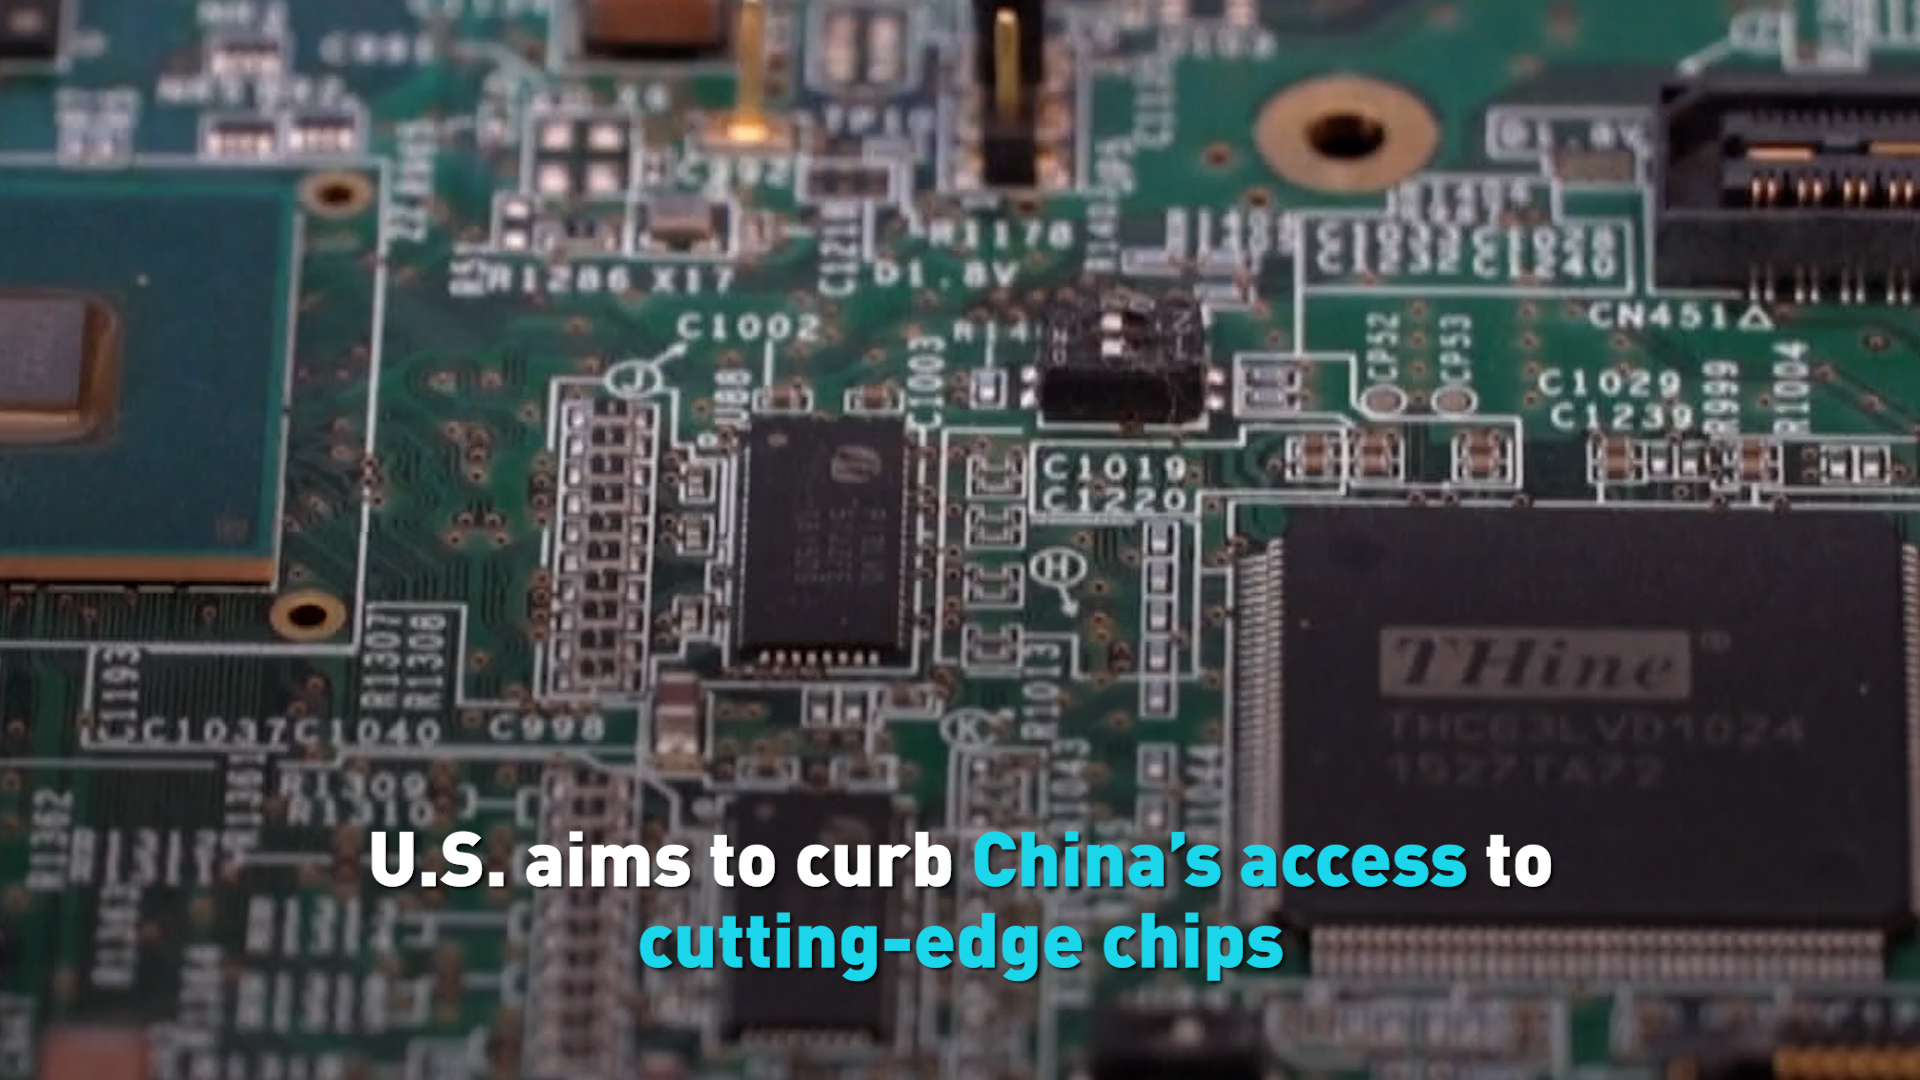 U.S. aims to curb China’s access to cutting-edge chips